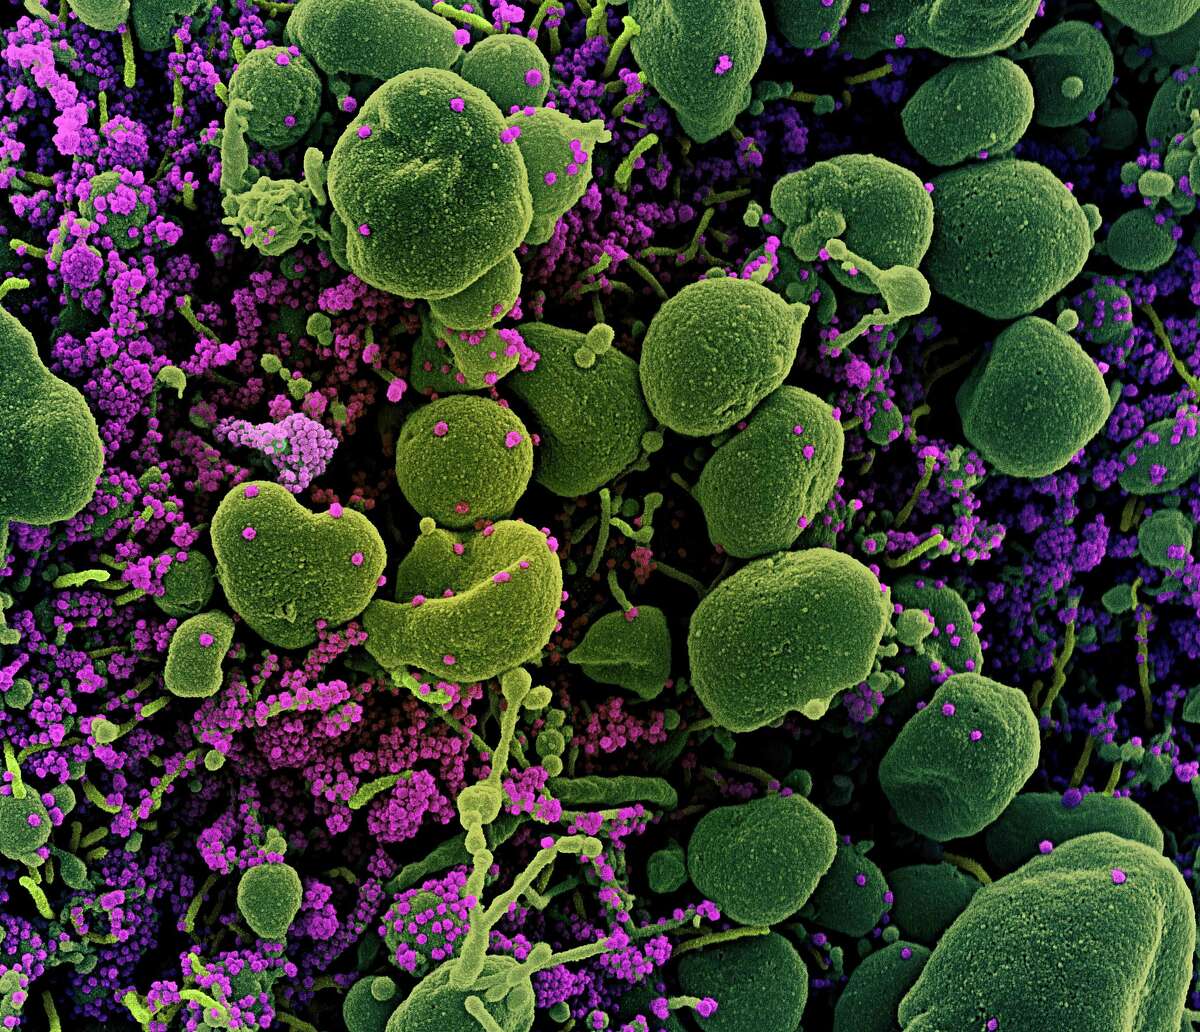 (FILES) This file undated handout image obtained July 15, 2020, courtesy of National Institute of Allergy and Infectious Diseases(NIH/NIAID), shows a colorized scanning electron micrograph of an apoptotic cell (green) heavily infected with SARS-CoV-2 virus particles (purple), isolated from a patient sample, captured at the NIAID Integrated Research Facility (IRF) in Fort Detrick, Maryland. - Wall Street stocks opened higher on August 5, 2020, extending a positive run on anticipation of more fiscal stimulus from Washington and progress on vaccines for the coronavirus pandemic. About 30 minutes into trading, the Dow Jones Industrial Average was up 1.0 percent at 27,097.60. The broad-based S&P 500 gained 0.6 percent to 3,325.52, while the tech-rich Nasdaq Composite Index climbed 0.3 percent to 10,978.77. The Nasdaq has ended at records the last two days.The US added a disappointing 167,000 private sector jobs in July, much below the level of the last two months and suggesting the recovery has slowed, according to payrolls firm ADP.Sentiment was also boosted by signs of forward movement on vaccines. (Photo by Handout / National Institute of Allergy and Infectious Diseases / AFP) / RESTRICTED TO EDITORIAL USE - MANDATORY CREDIT "AFP PHOTO /NATIONAL INSTITUTE OF ALLERGY AND INFECTIOUS DISEASES/HANDOUT " - NO MARKETING - NO ADVERTISING CAMPAIGNS - DISTRIBUTED AS A SERVICE TO CLIENTS (Photo by HANDOUT/National Institute of Allergy an/AFP via Getty Images)